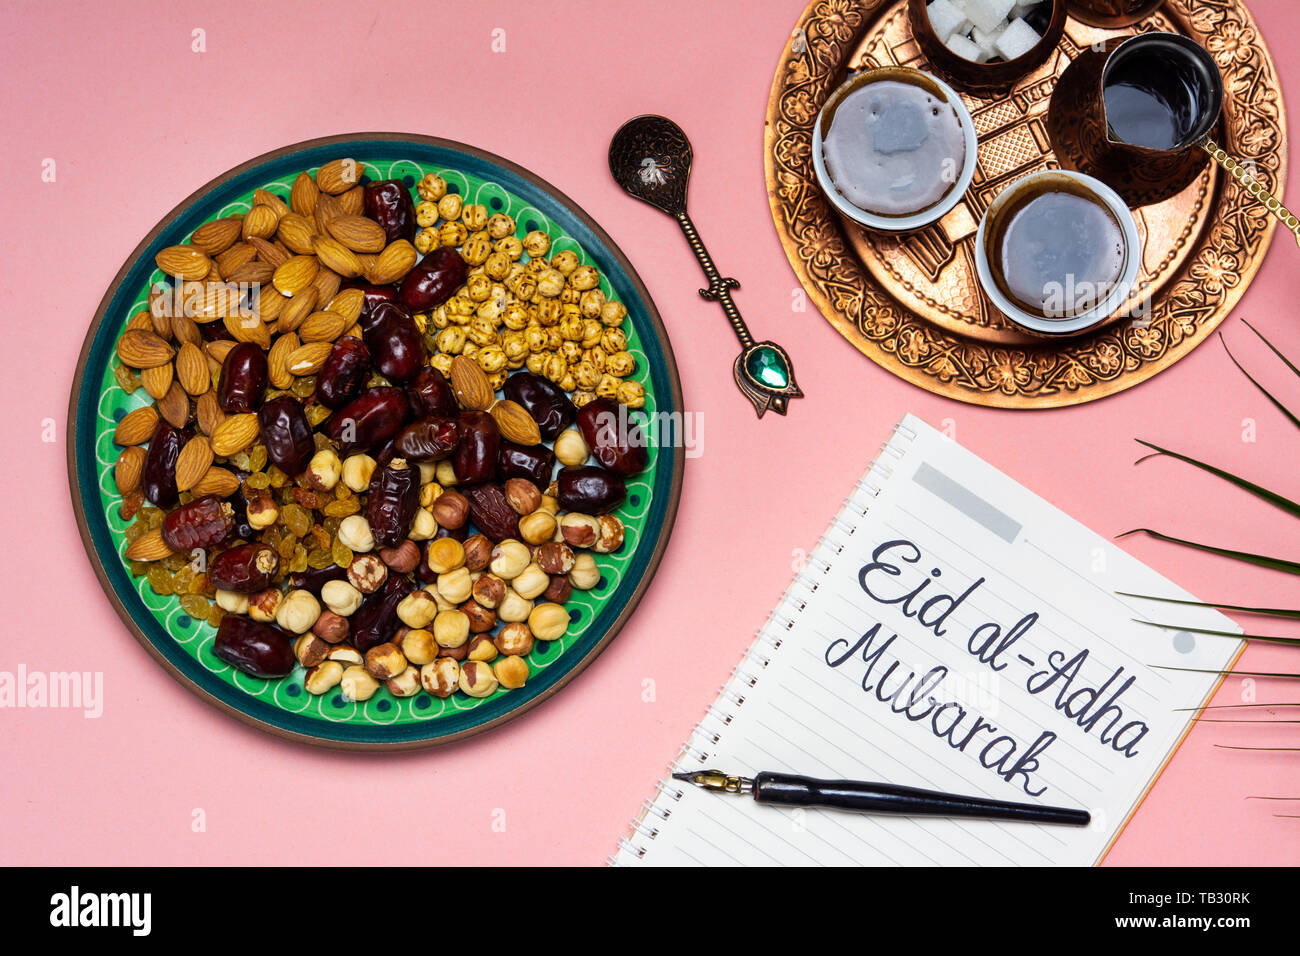 Eid Mubarak note with snacks and coffee on a table Stock Photo